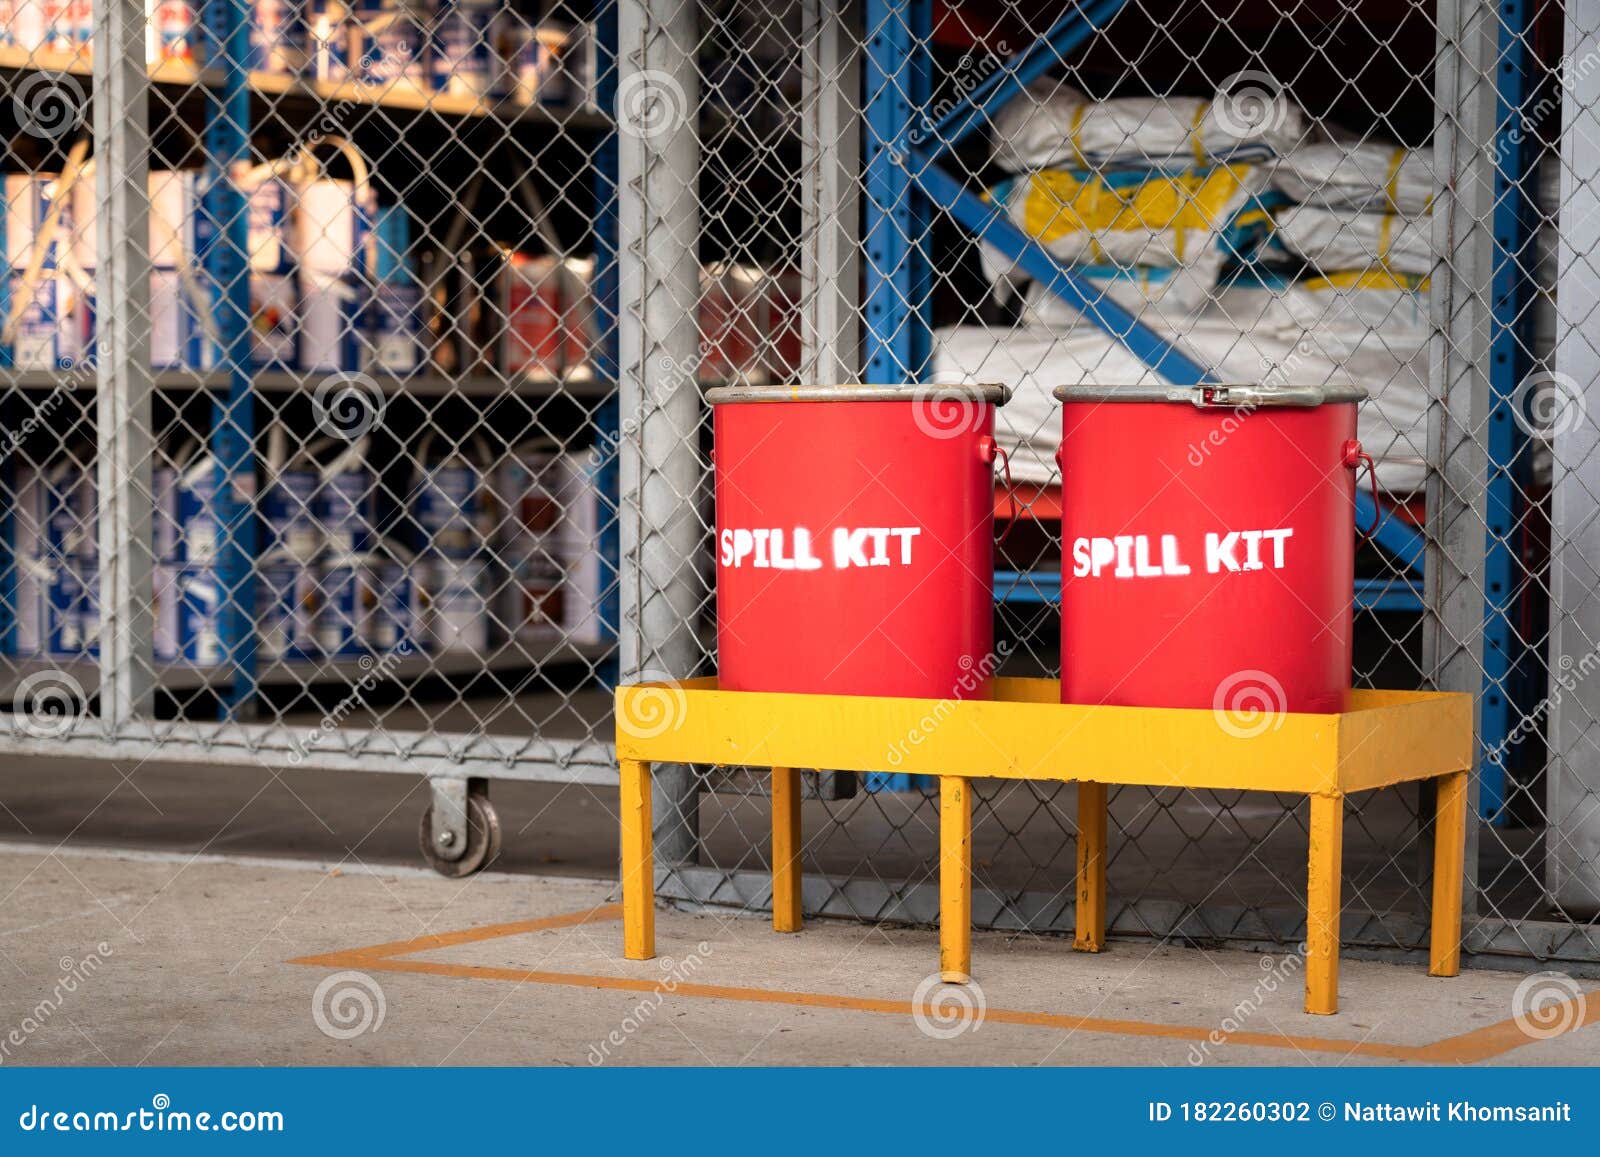 spill kit containment boxes in industry.